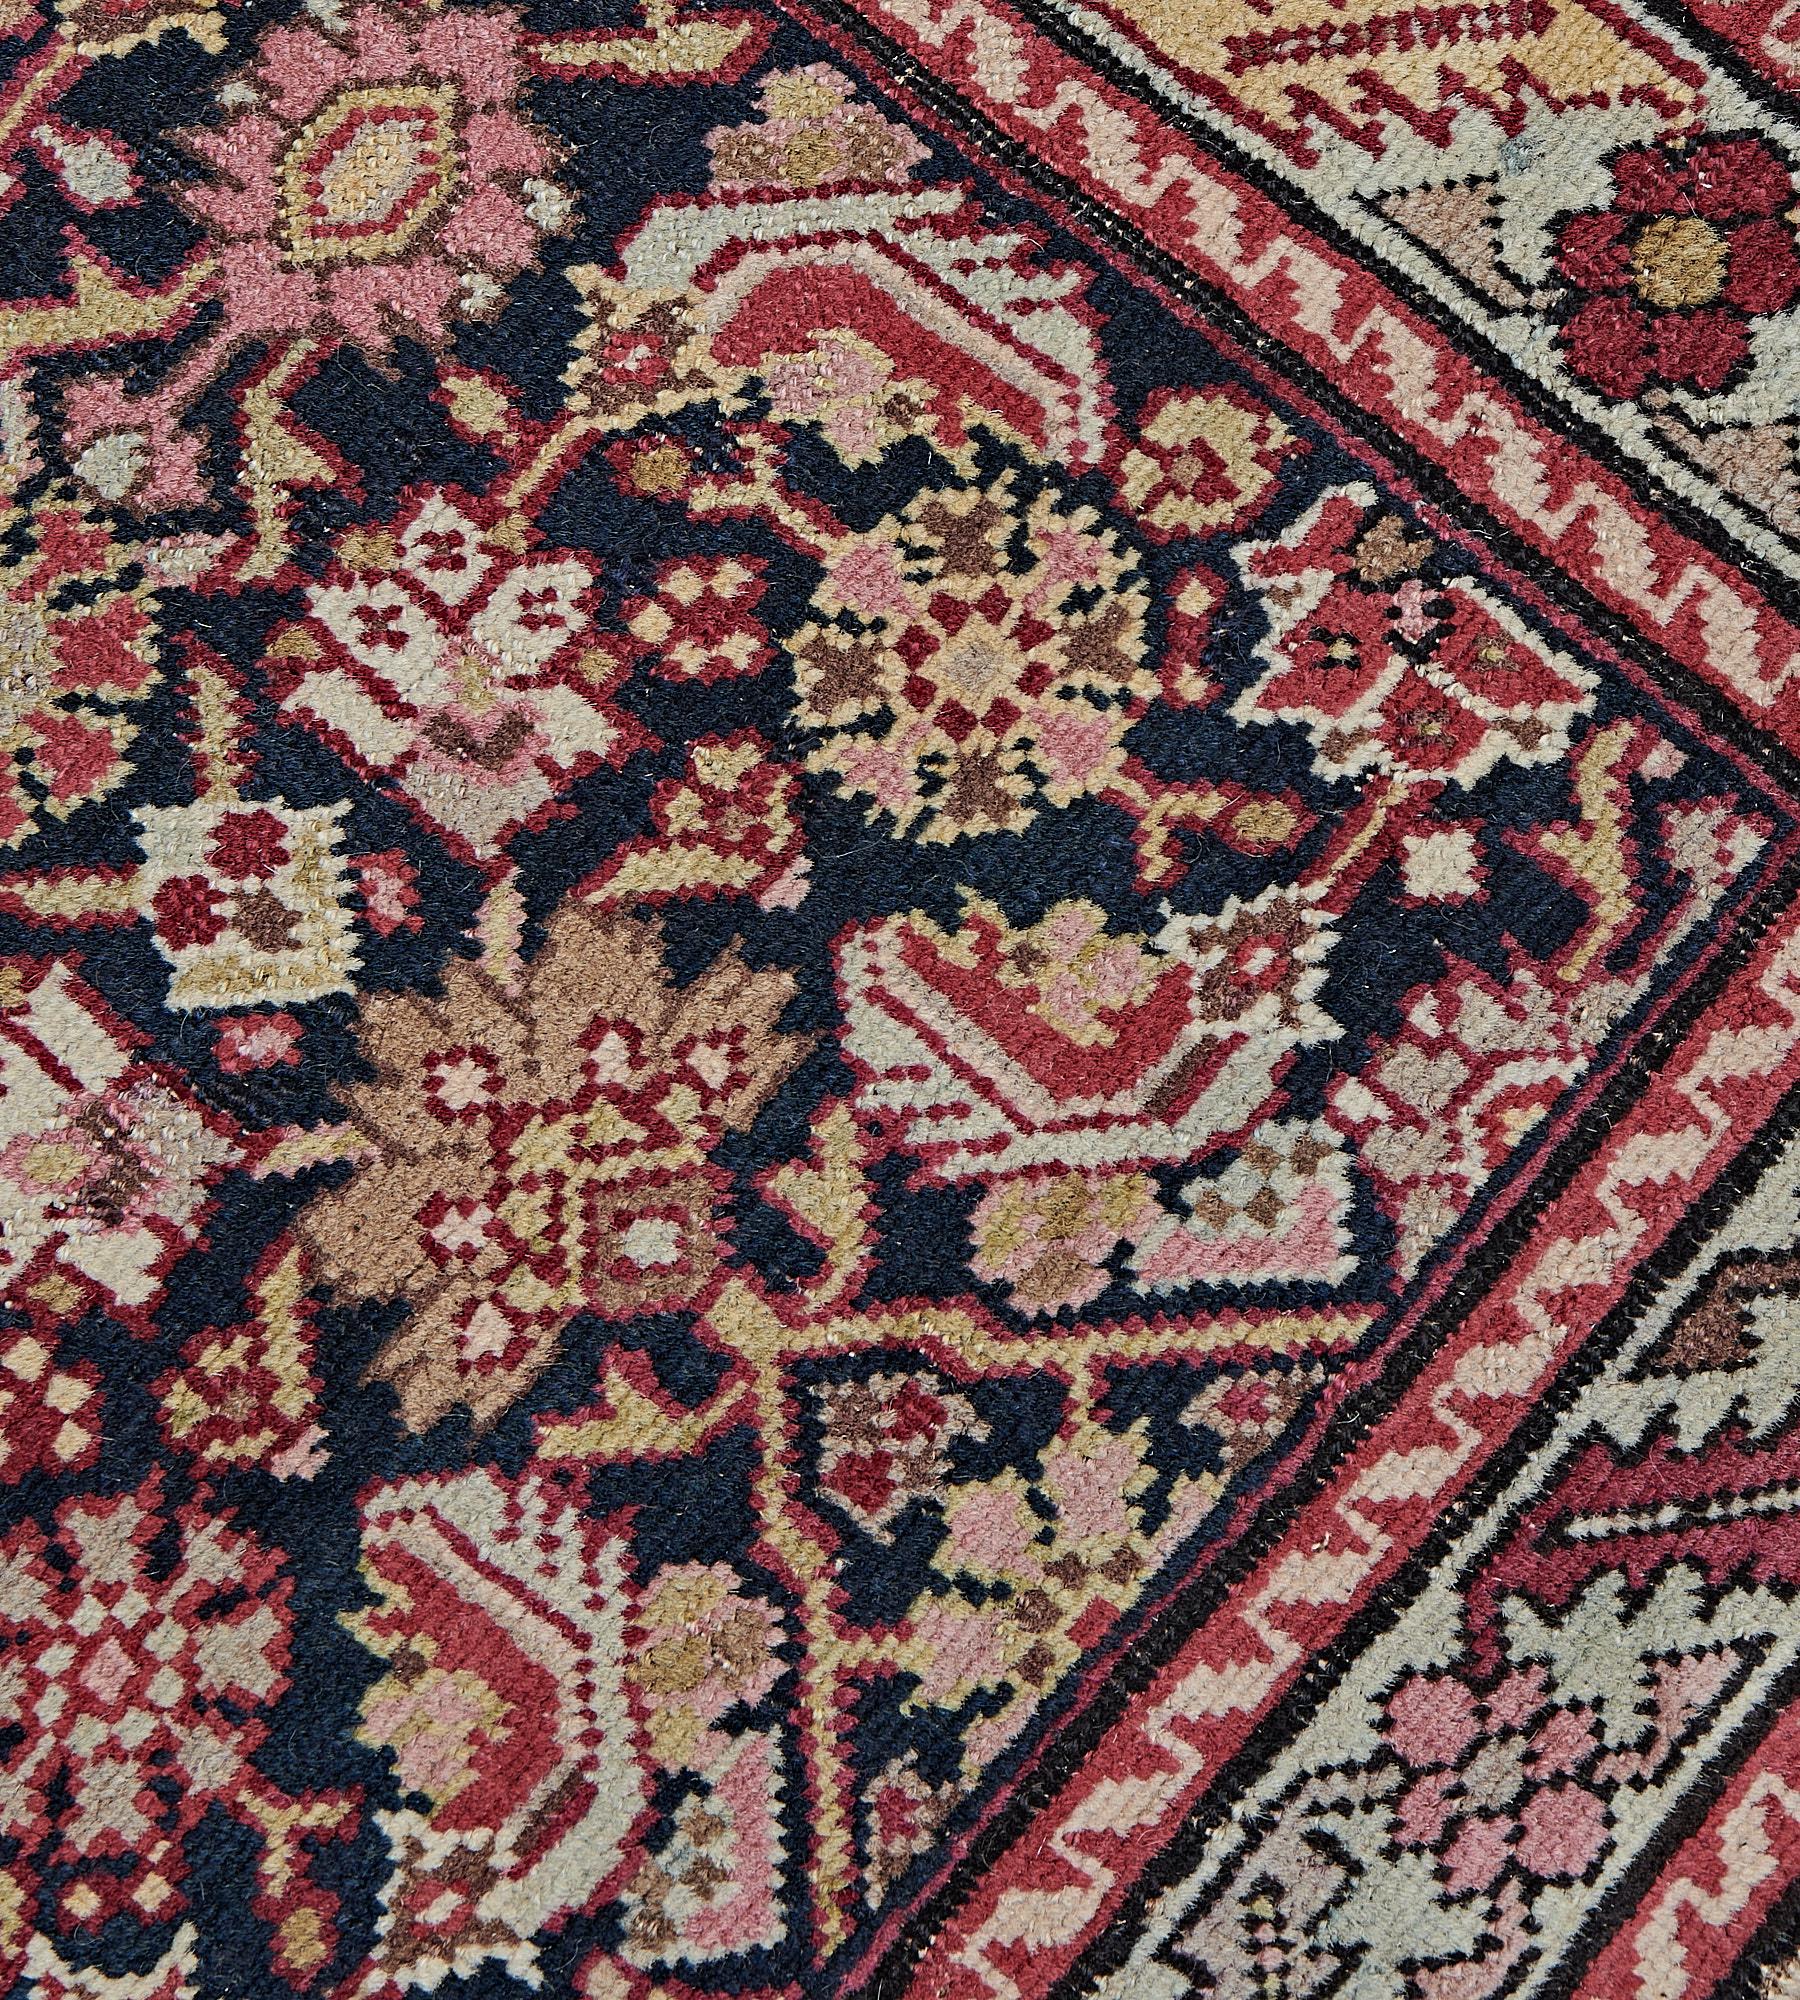 Antique Circa-1890 Herati-pattern Karabagh Runner In Good Condition For Sale In West Hollywood, CA